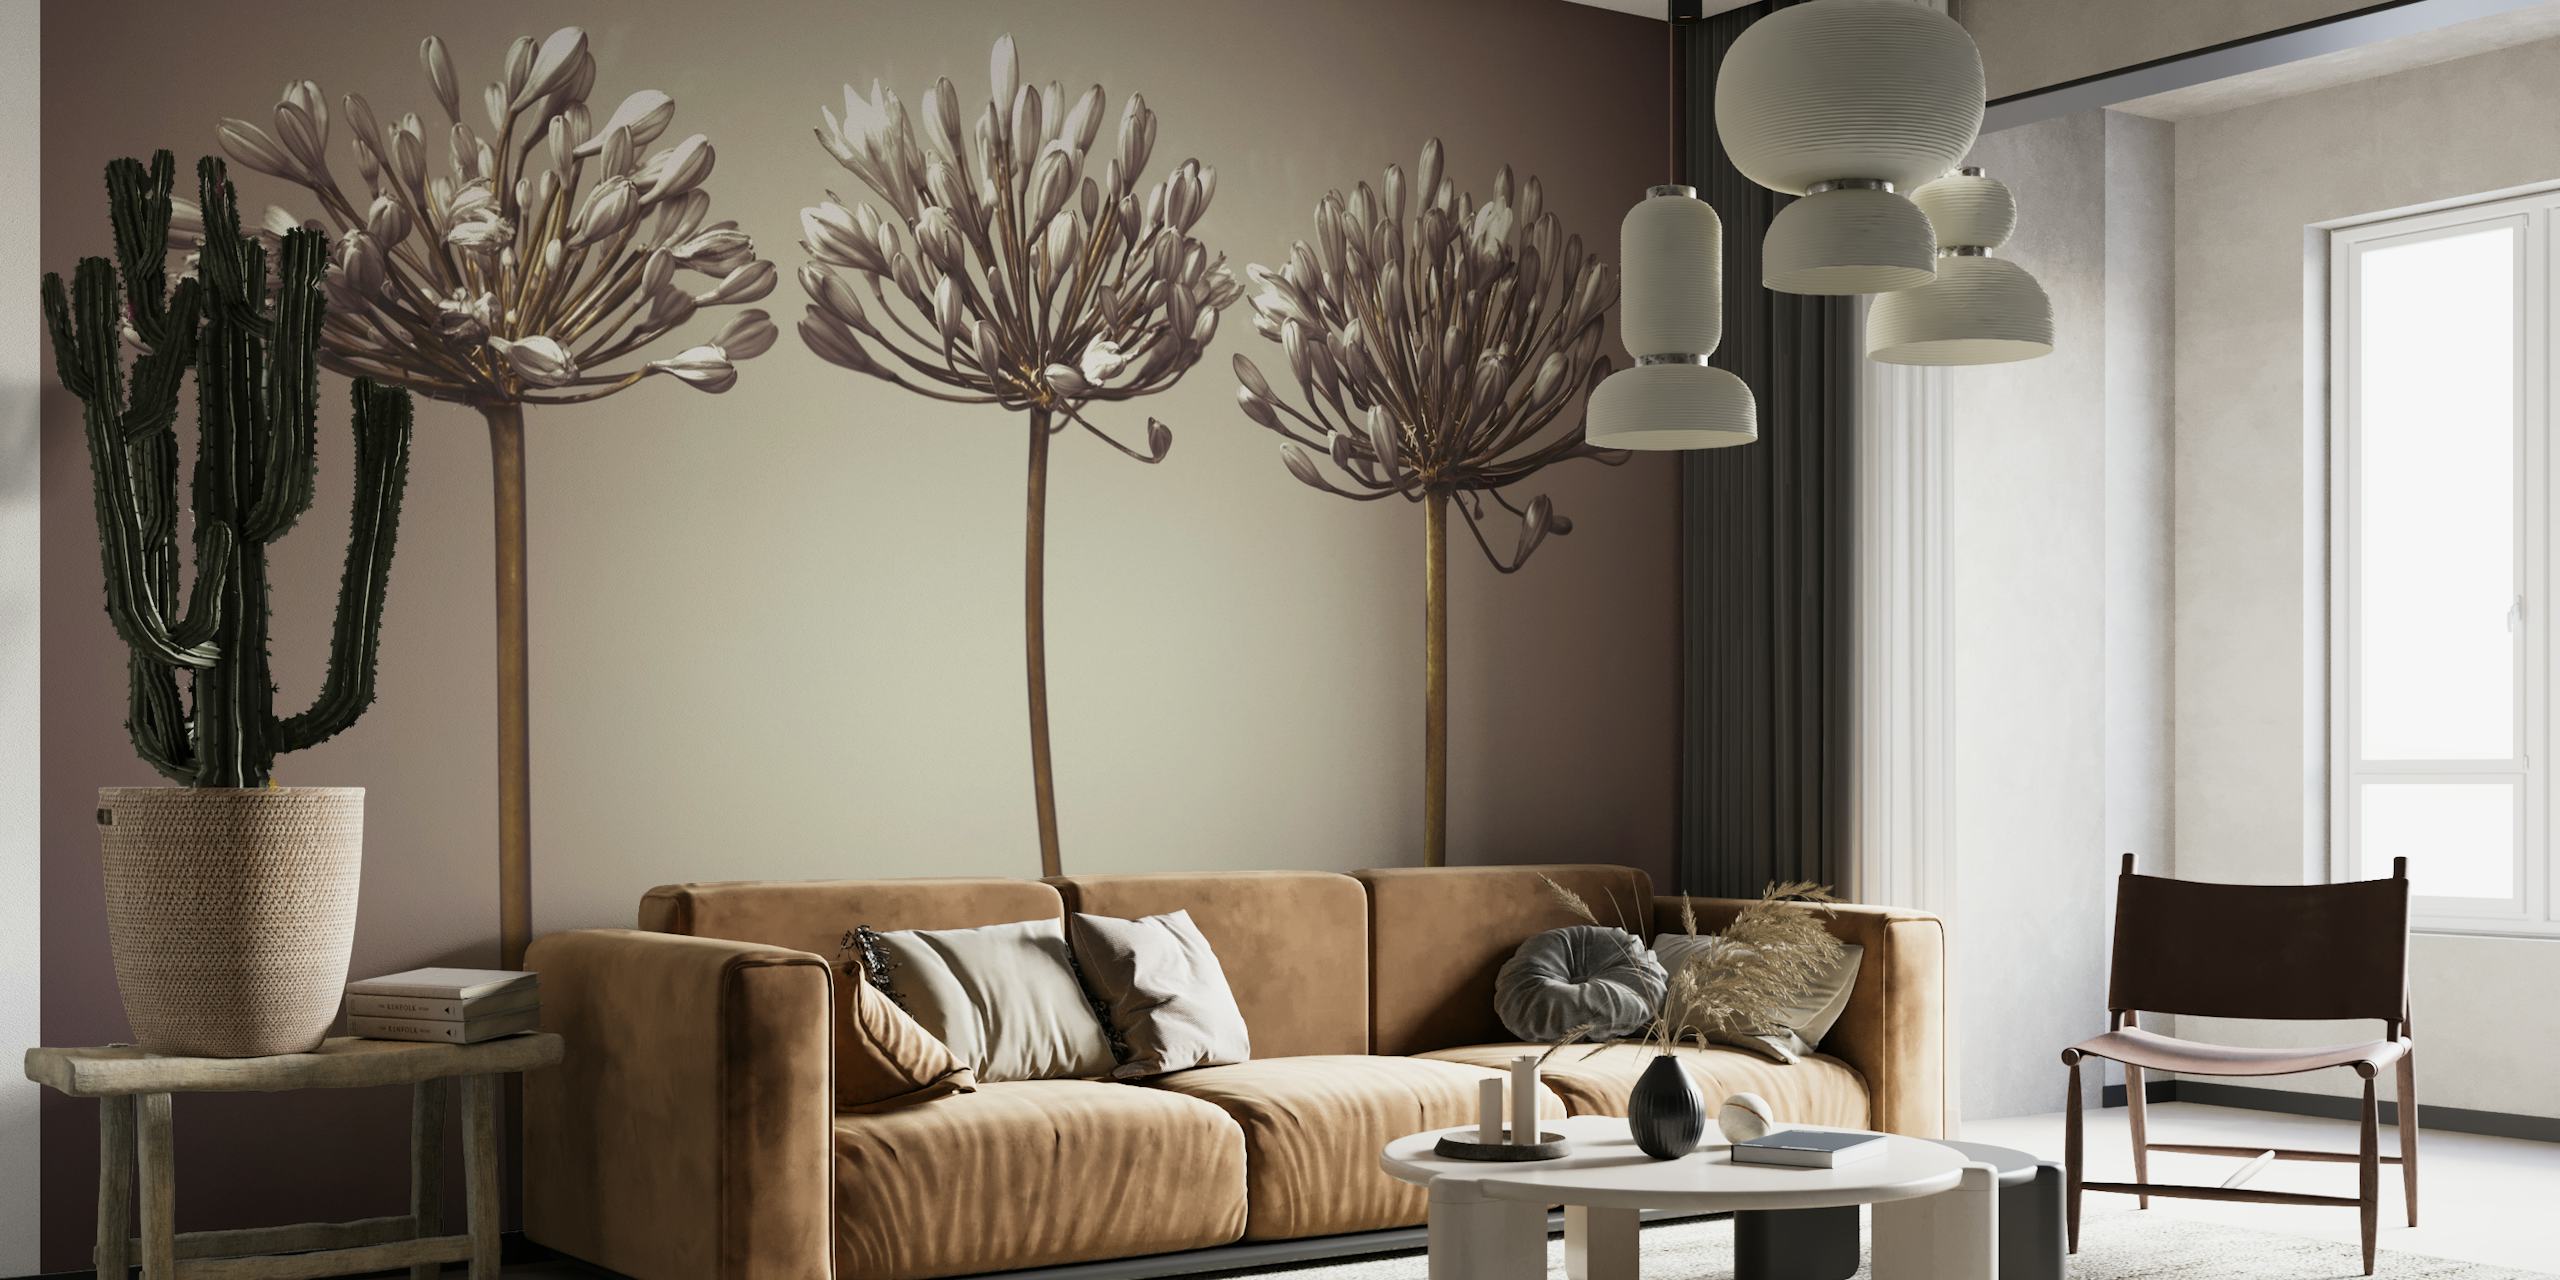 Three stylized African Lilies wall mural in a monochrome palette